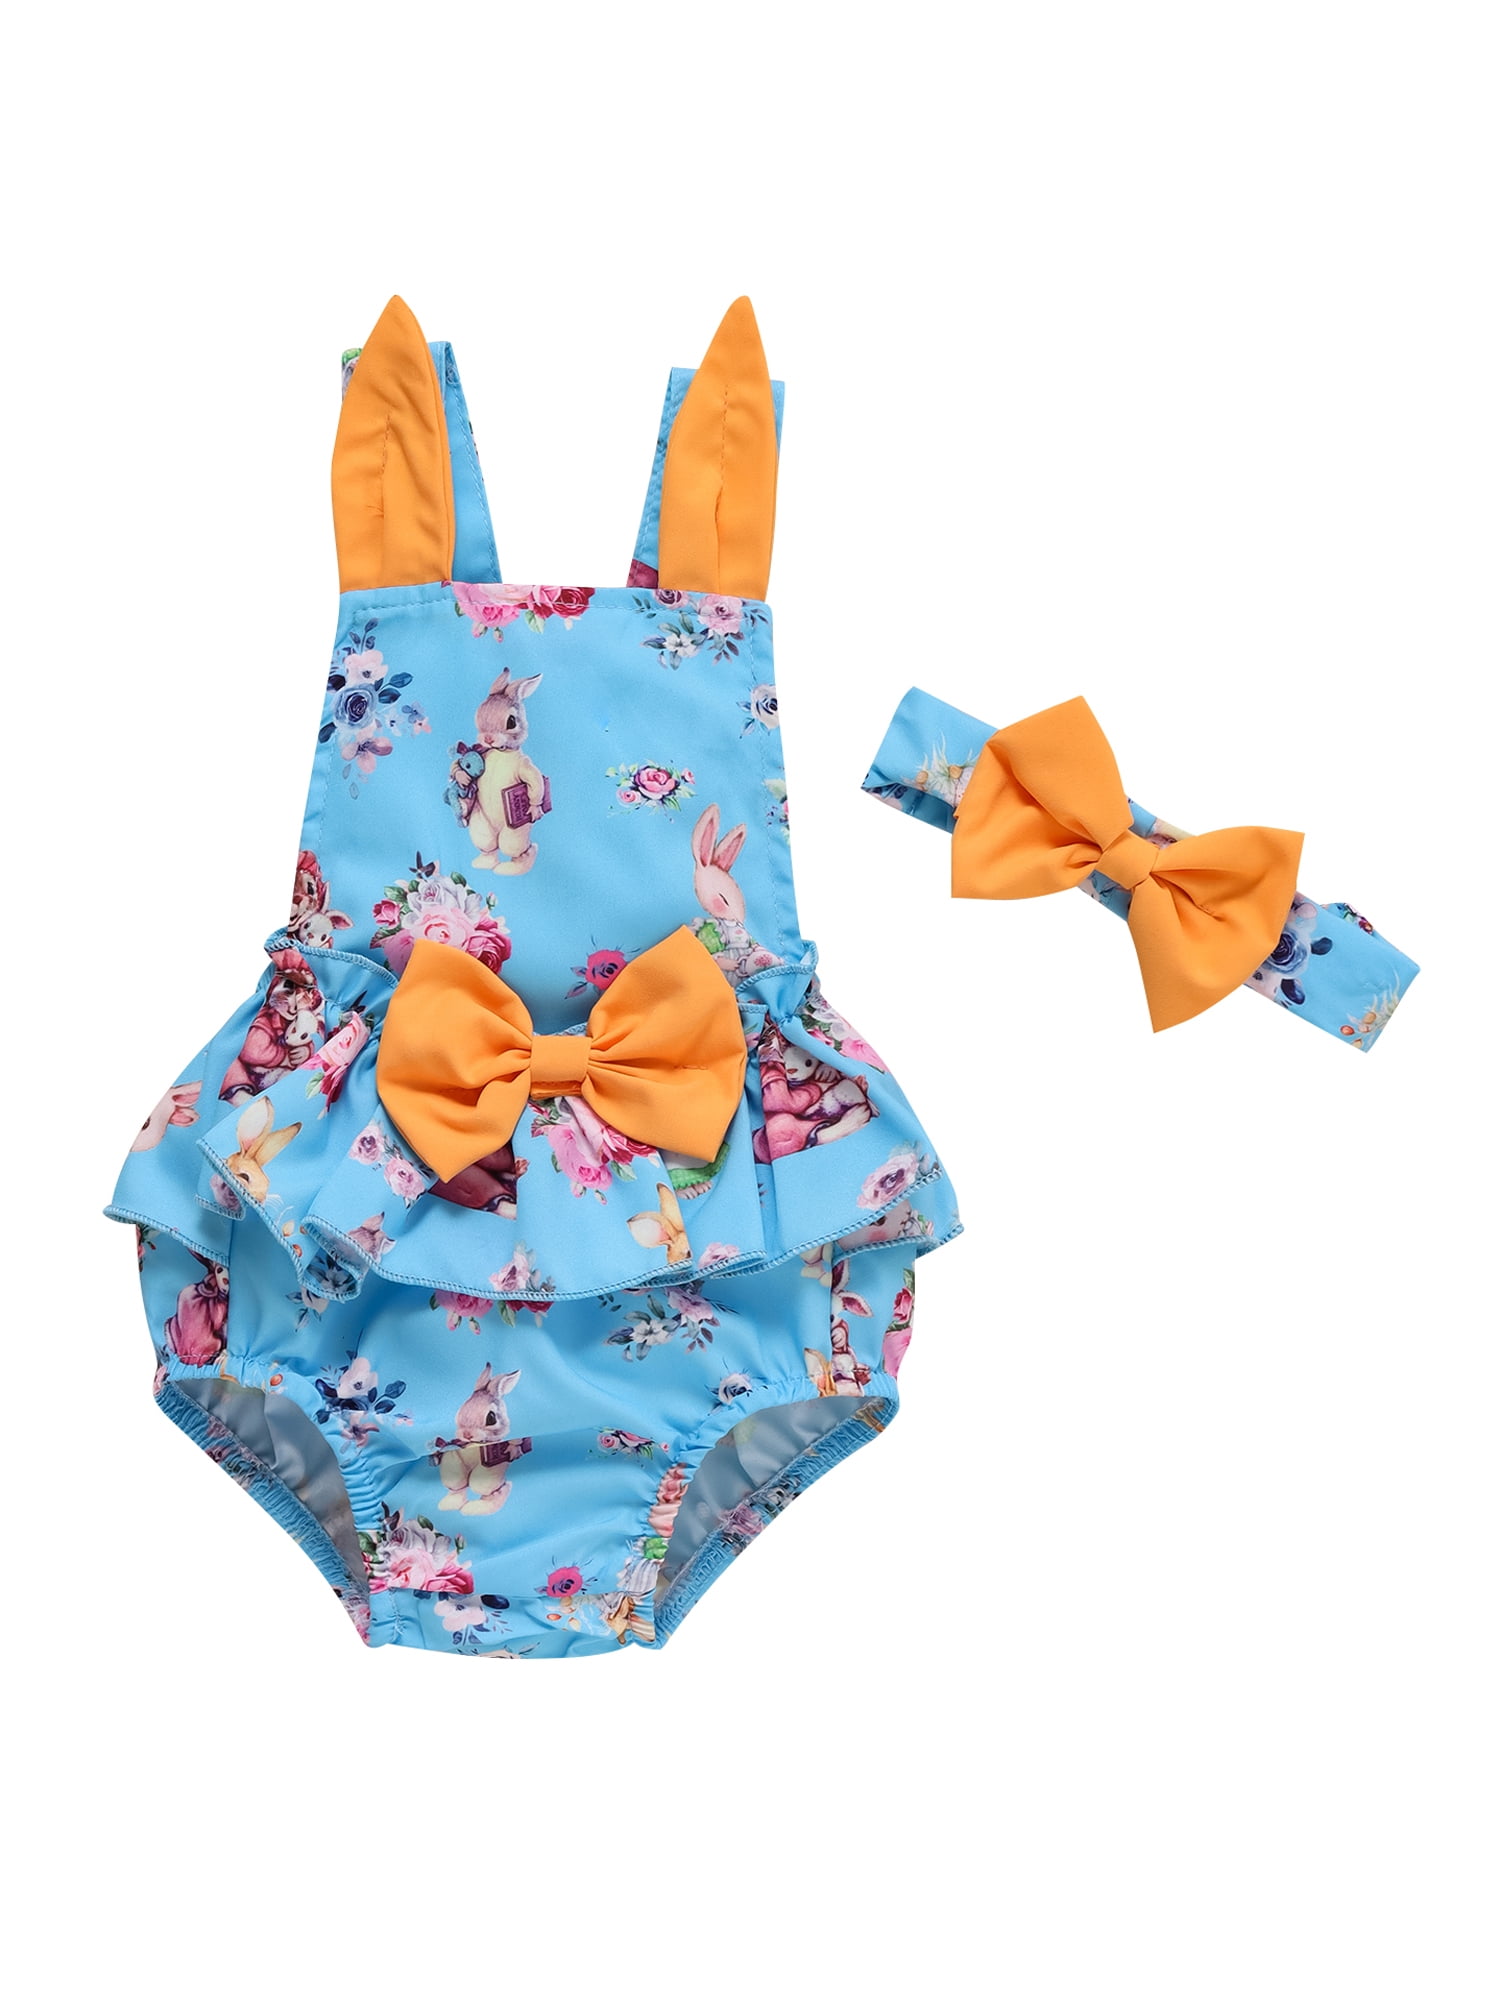 New Carter's Girls 1 Piece Outfit Romper Ice Cream Treats Ruffle Rear 6 9 12 24m